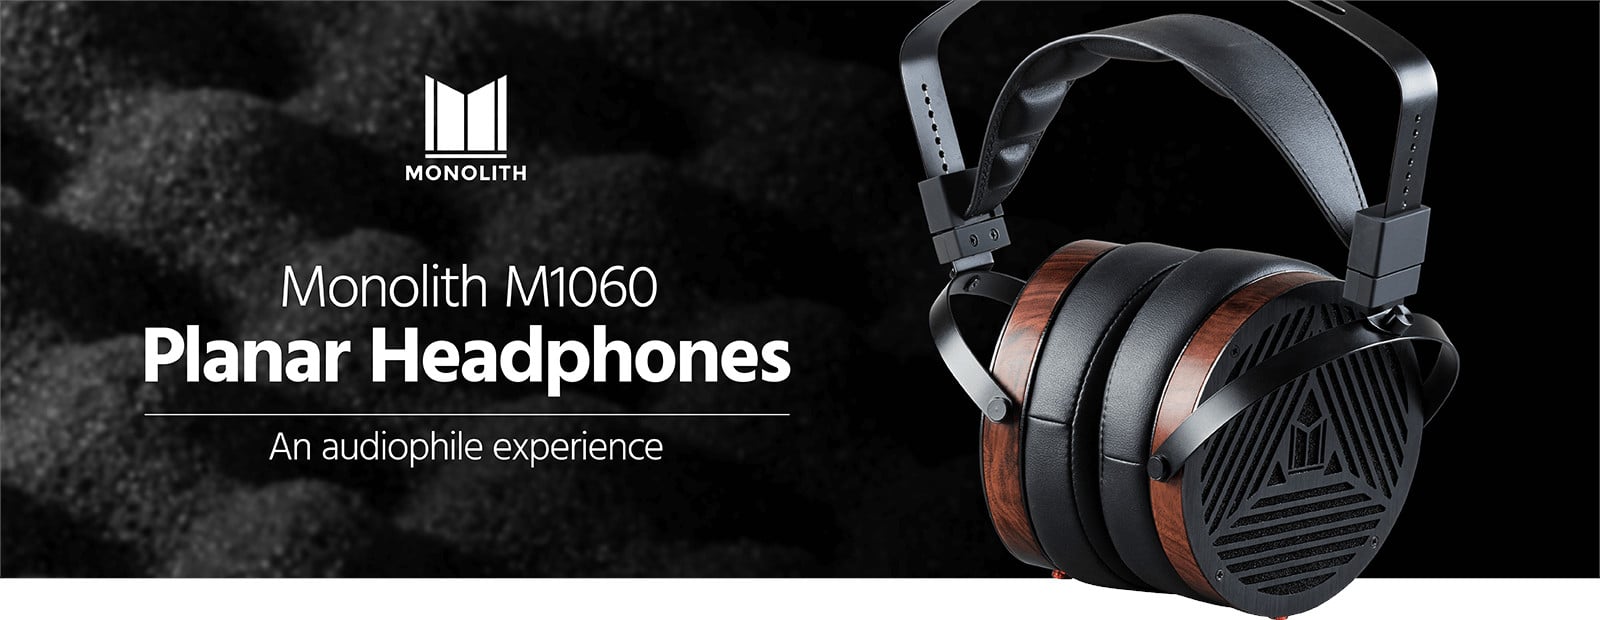 Monoprice Monolith M1060 Over Ear Planar Magnetic Headphones - Black/Wood  With 106mm Driver, Open Back Design, Comfort Ear Pads For